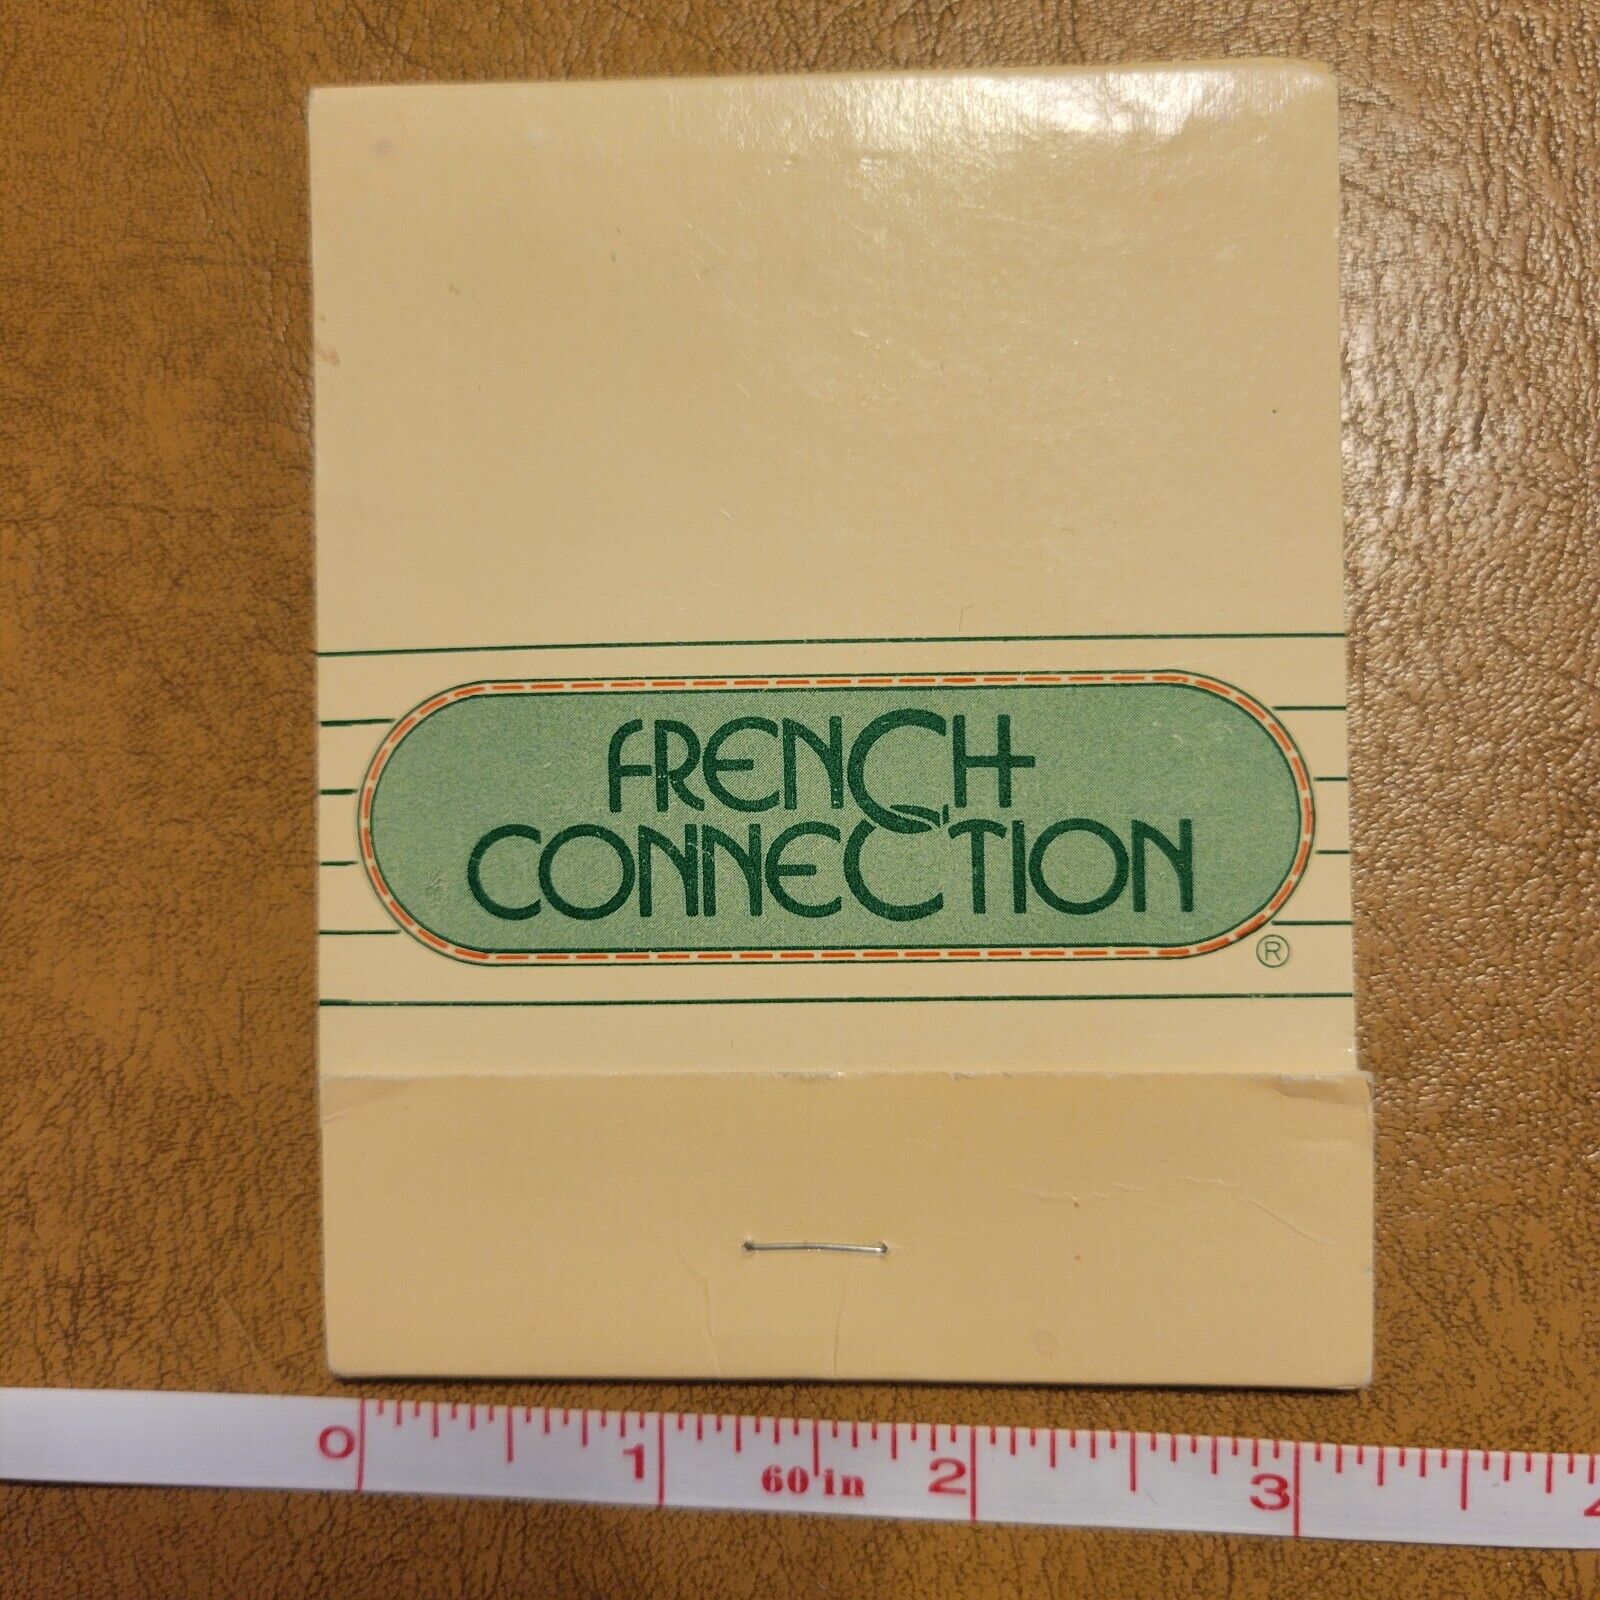 French Connection New York LARGE Oversize 1 match used struck Vintage Matchbook